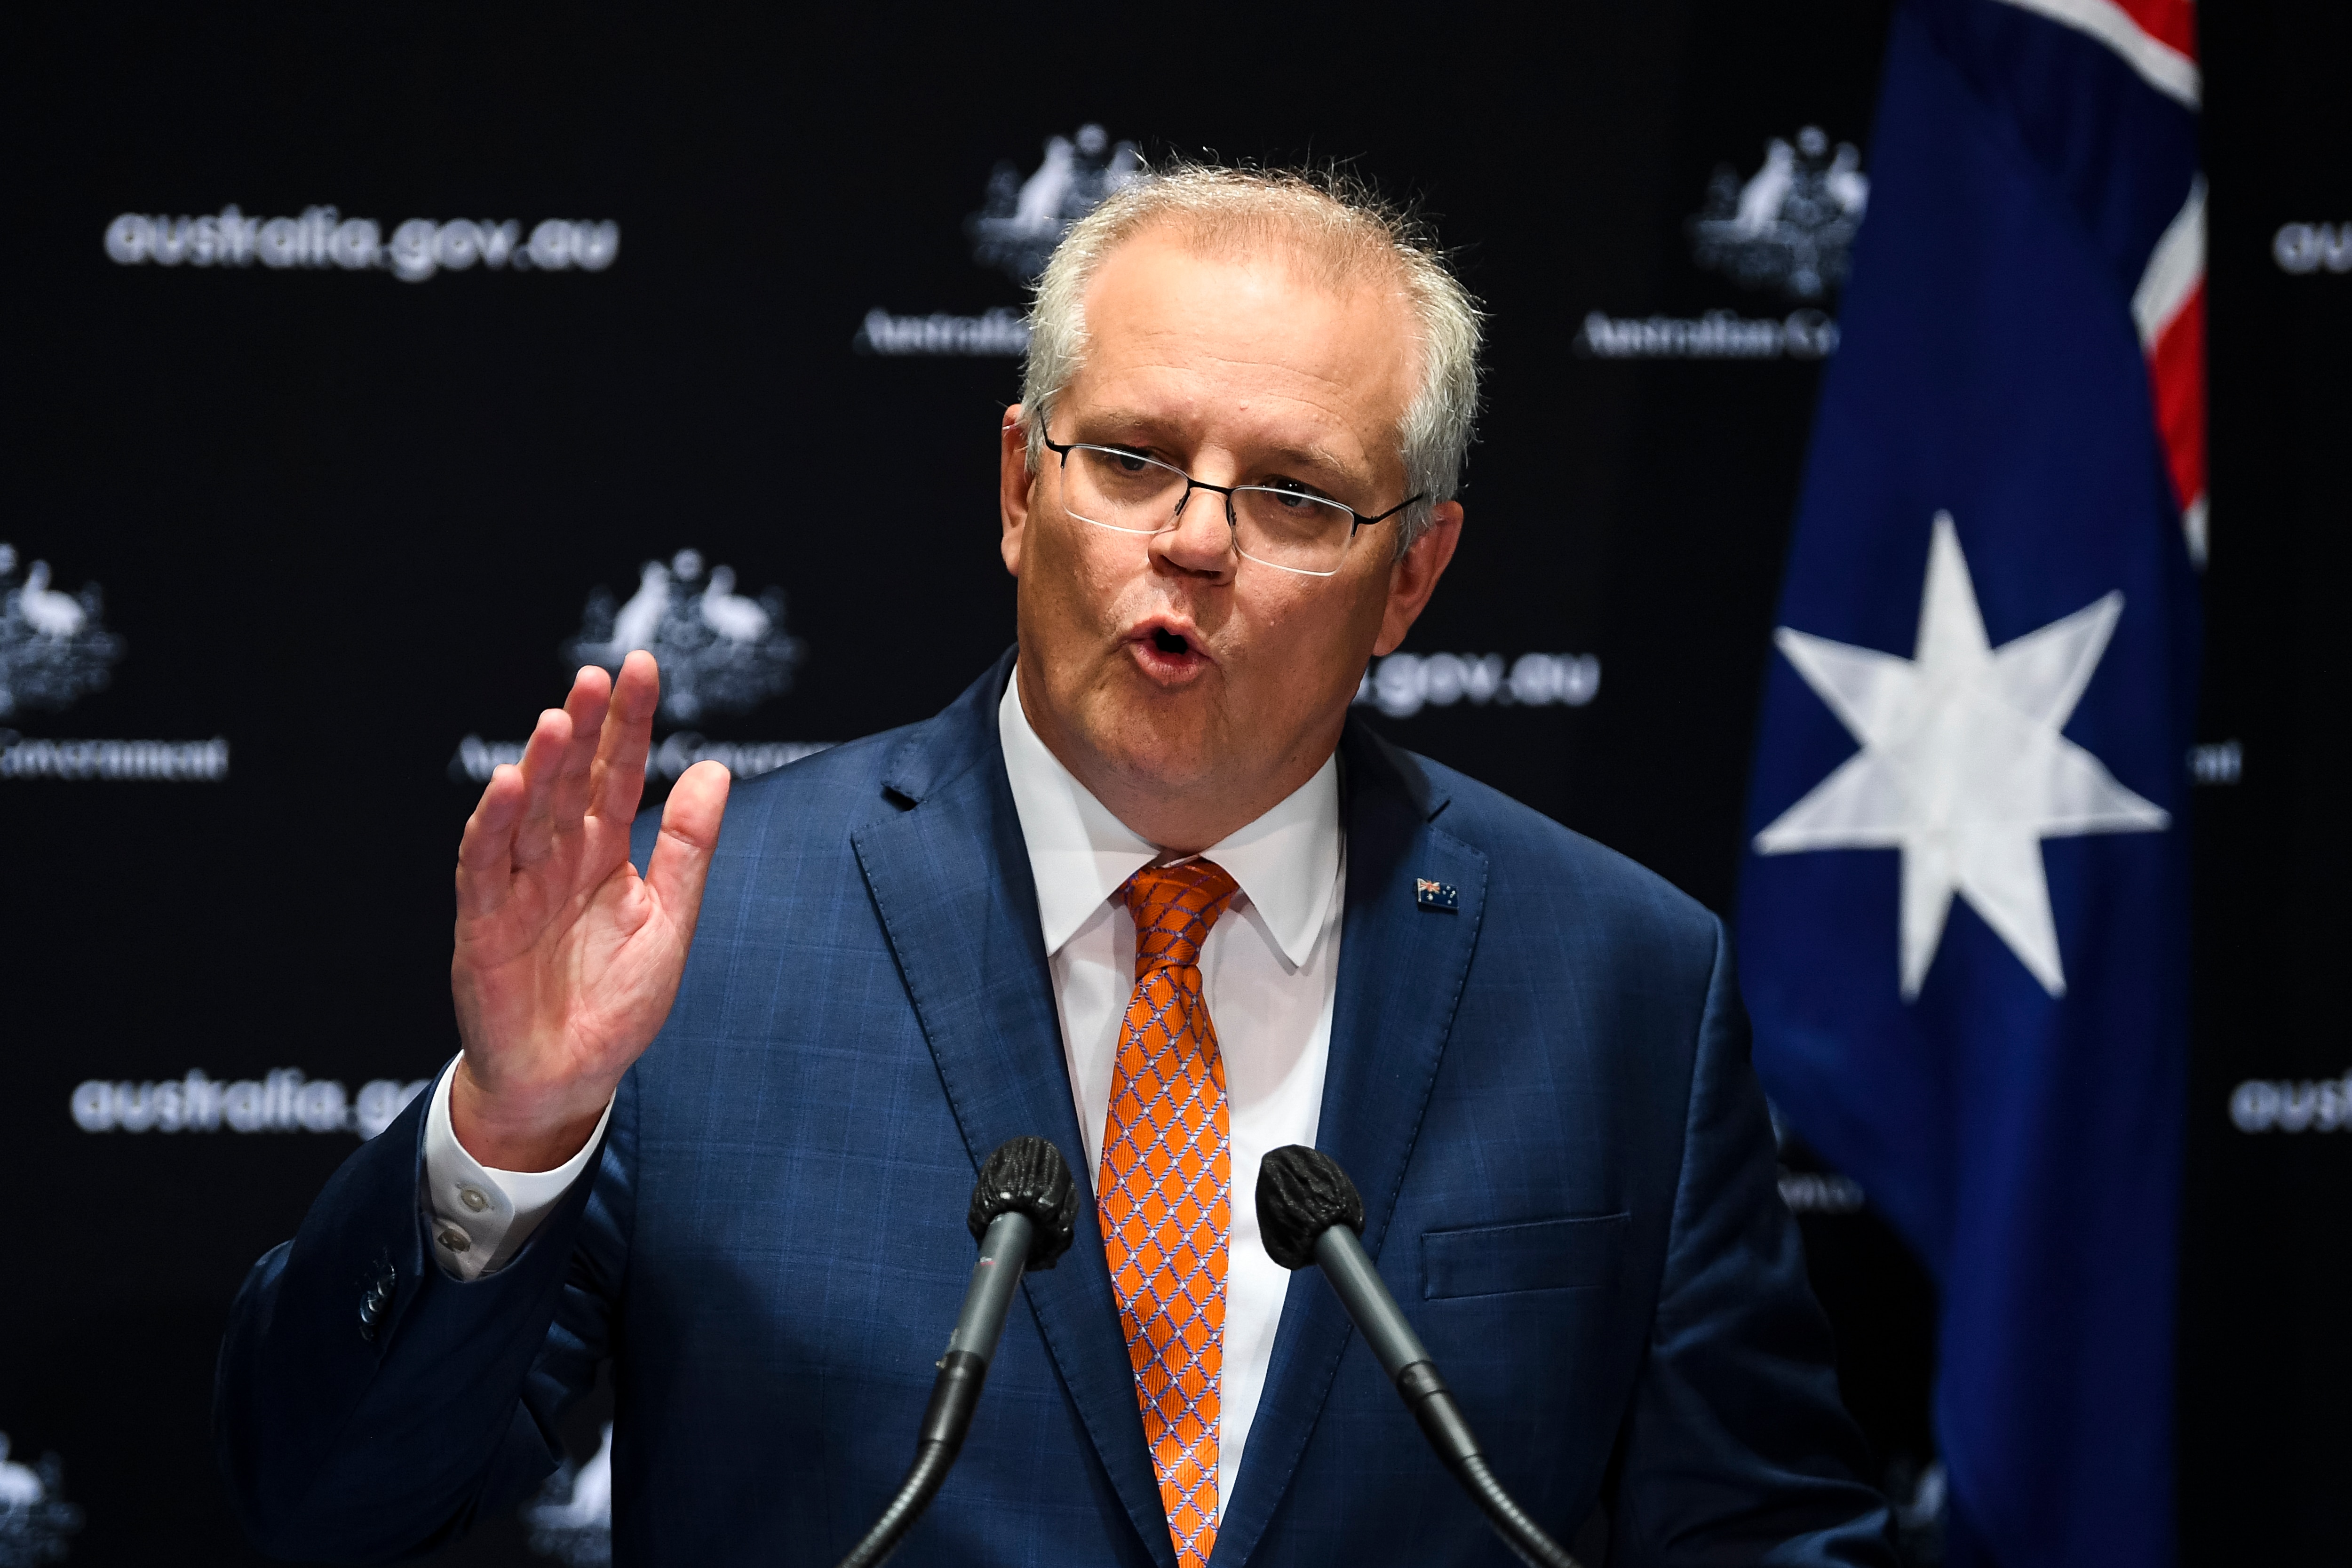 Prime Minister Scott Morrison speaks during a press conference at Parliament House in Canberra.